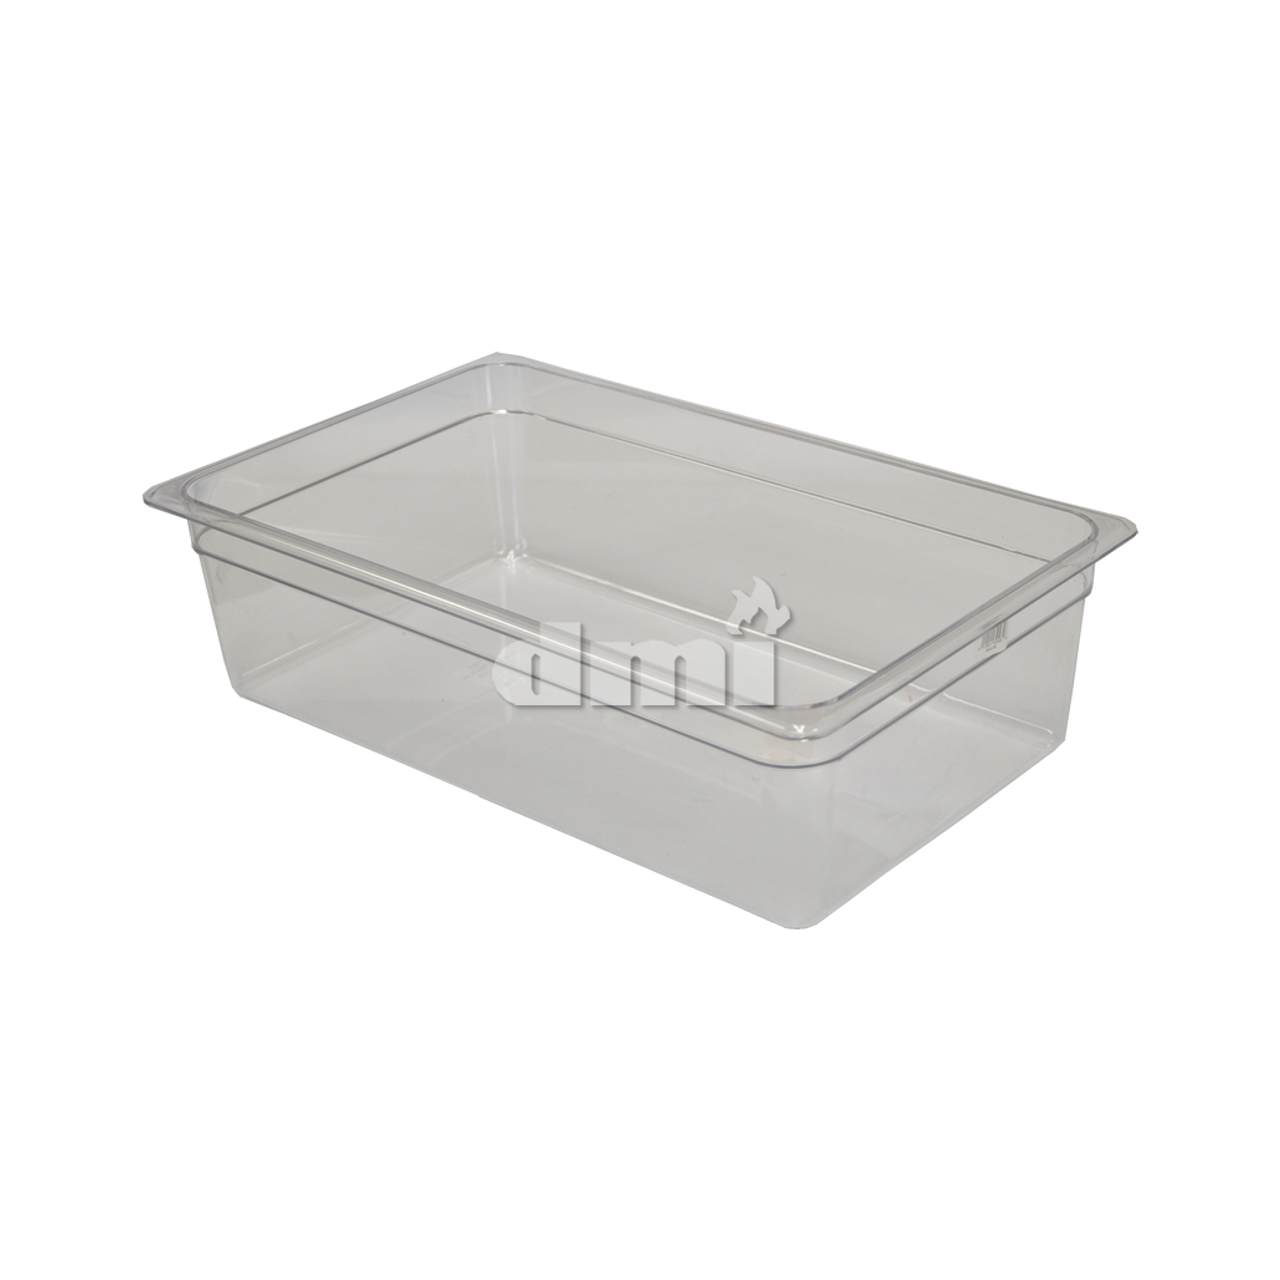 8751-6  Full Size Clear Pan, 6" Deep